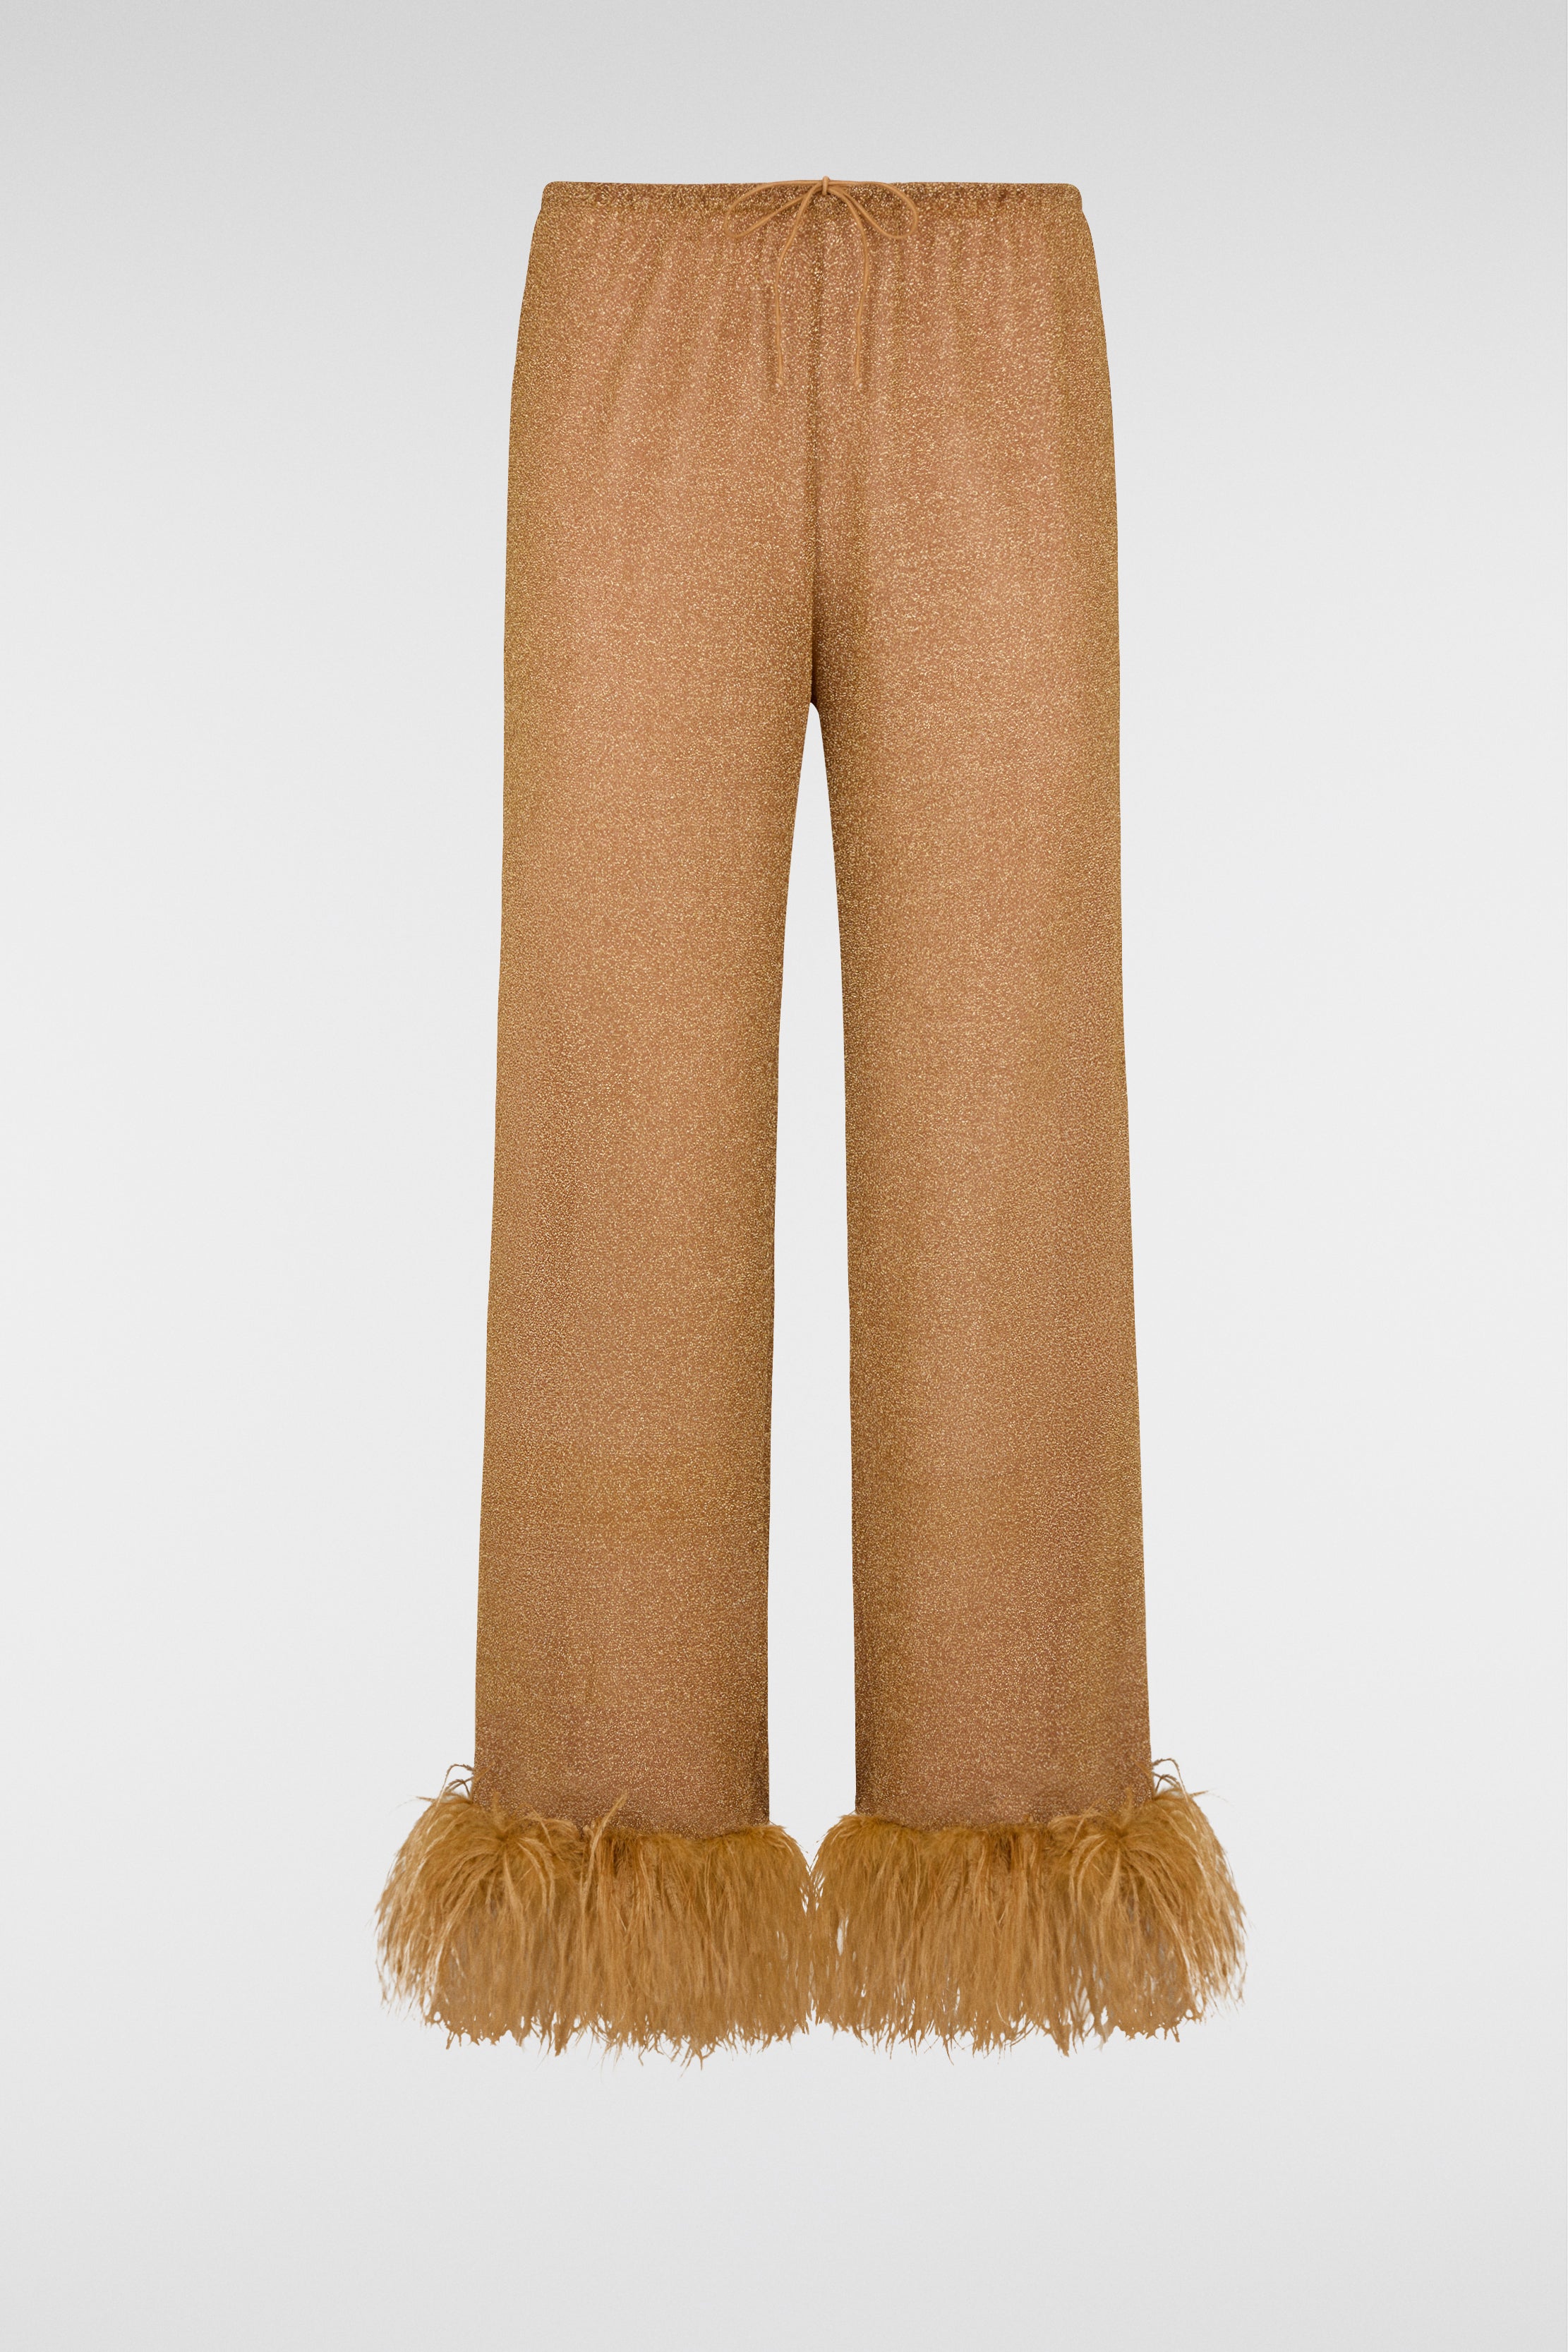 OsÃ©ree Plumage feather-trimmed wide-leg pants